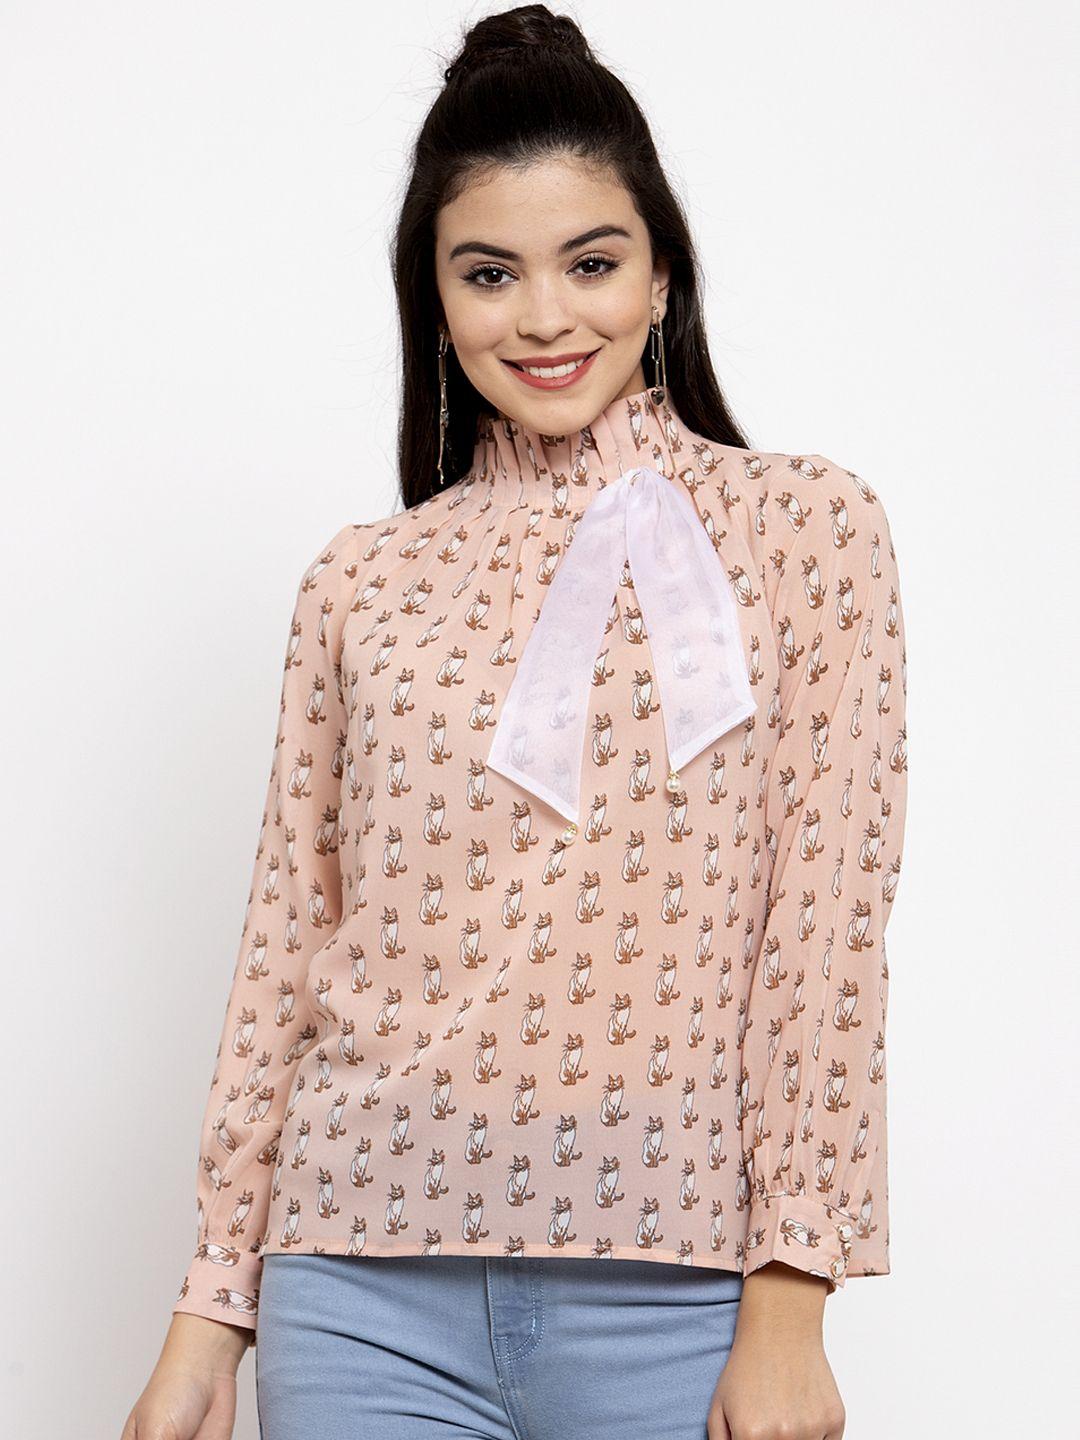 kassually women pink & off-white printed top